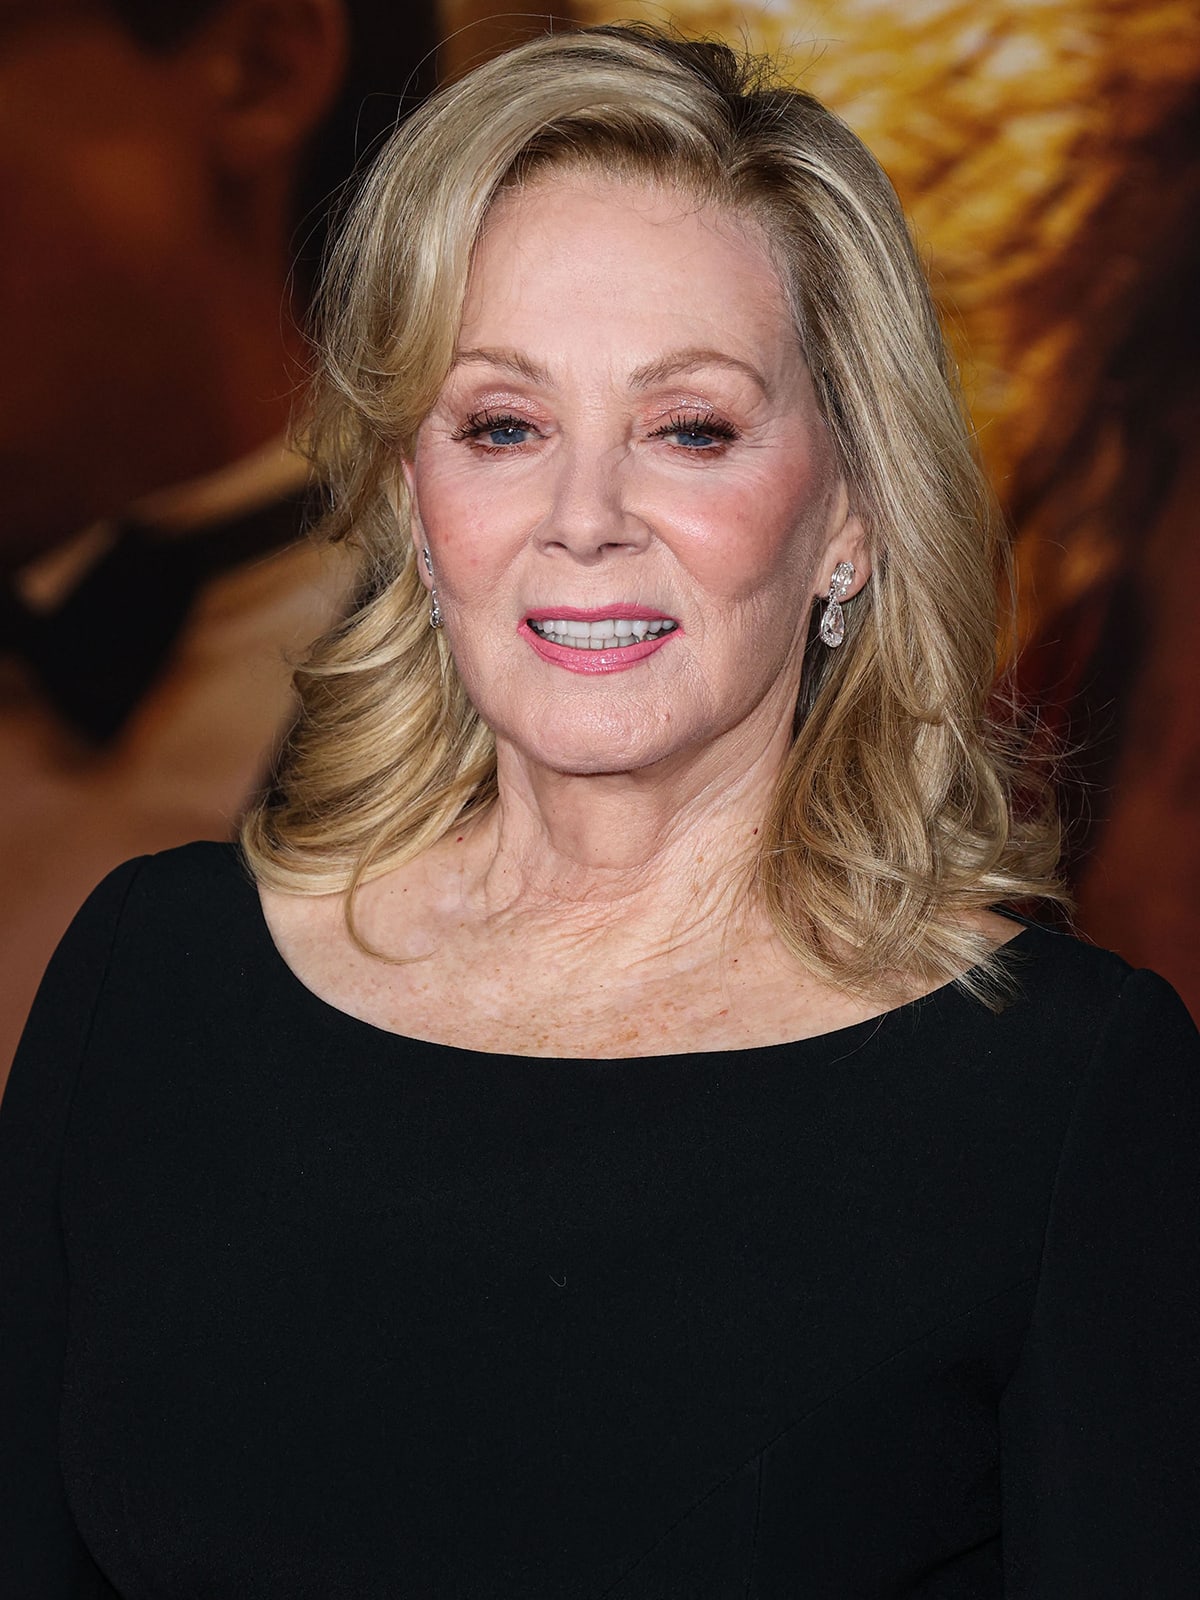 Jean Smart styles her blonde hair in soft waves with a side part and wears soft pink eyeshadow and lipstick